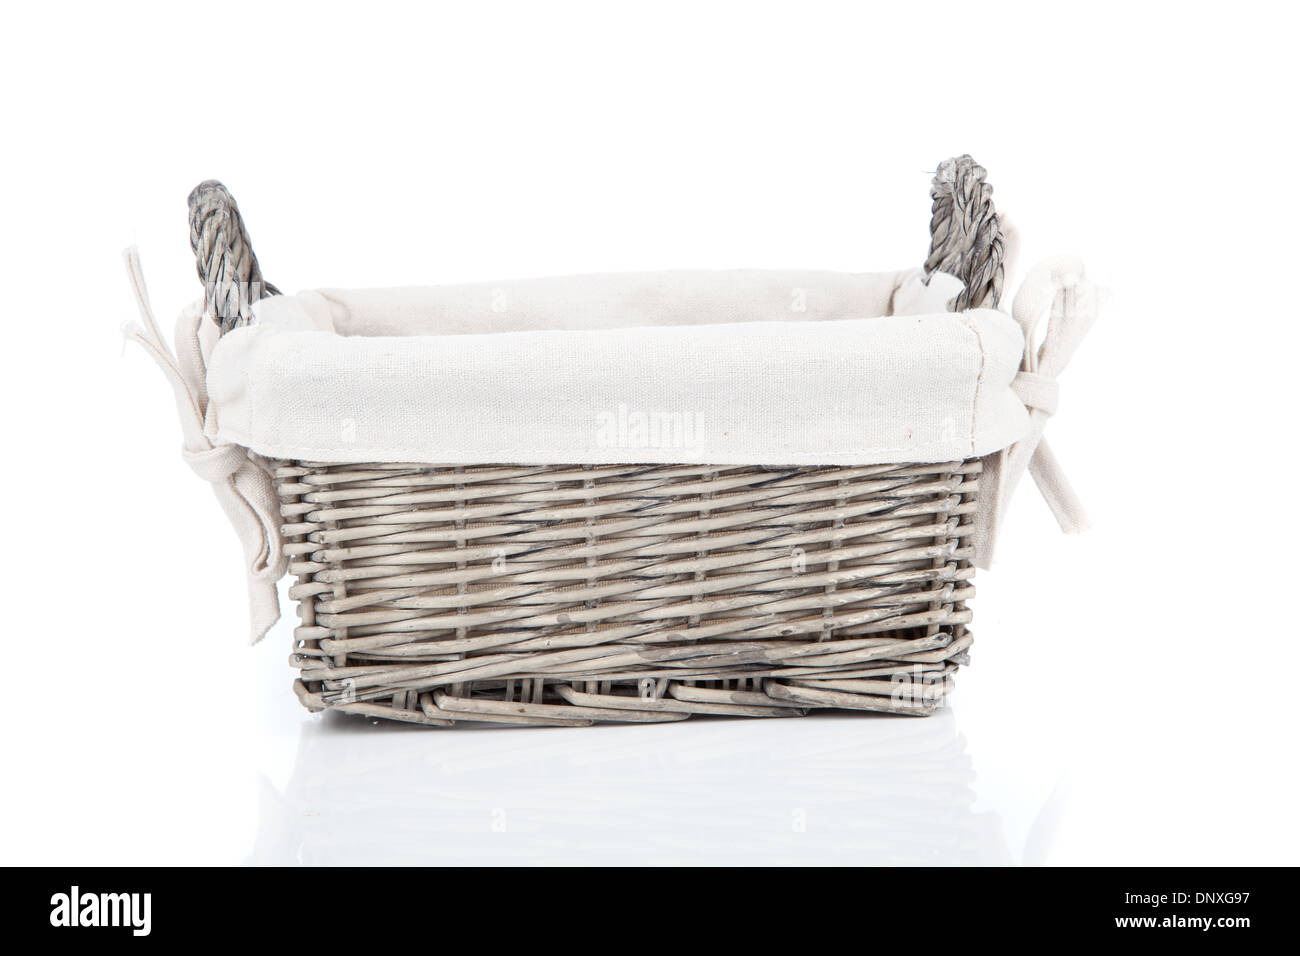 wooden basket, isolated on a white background Stock Photo